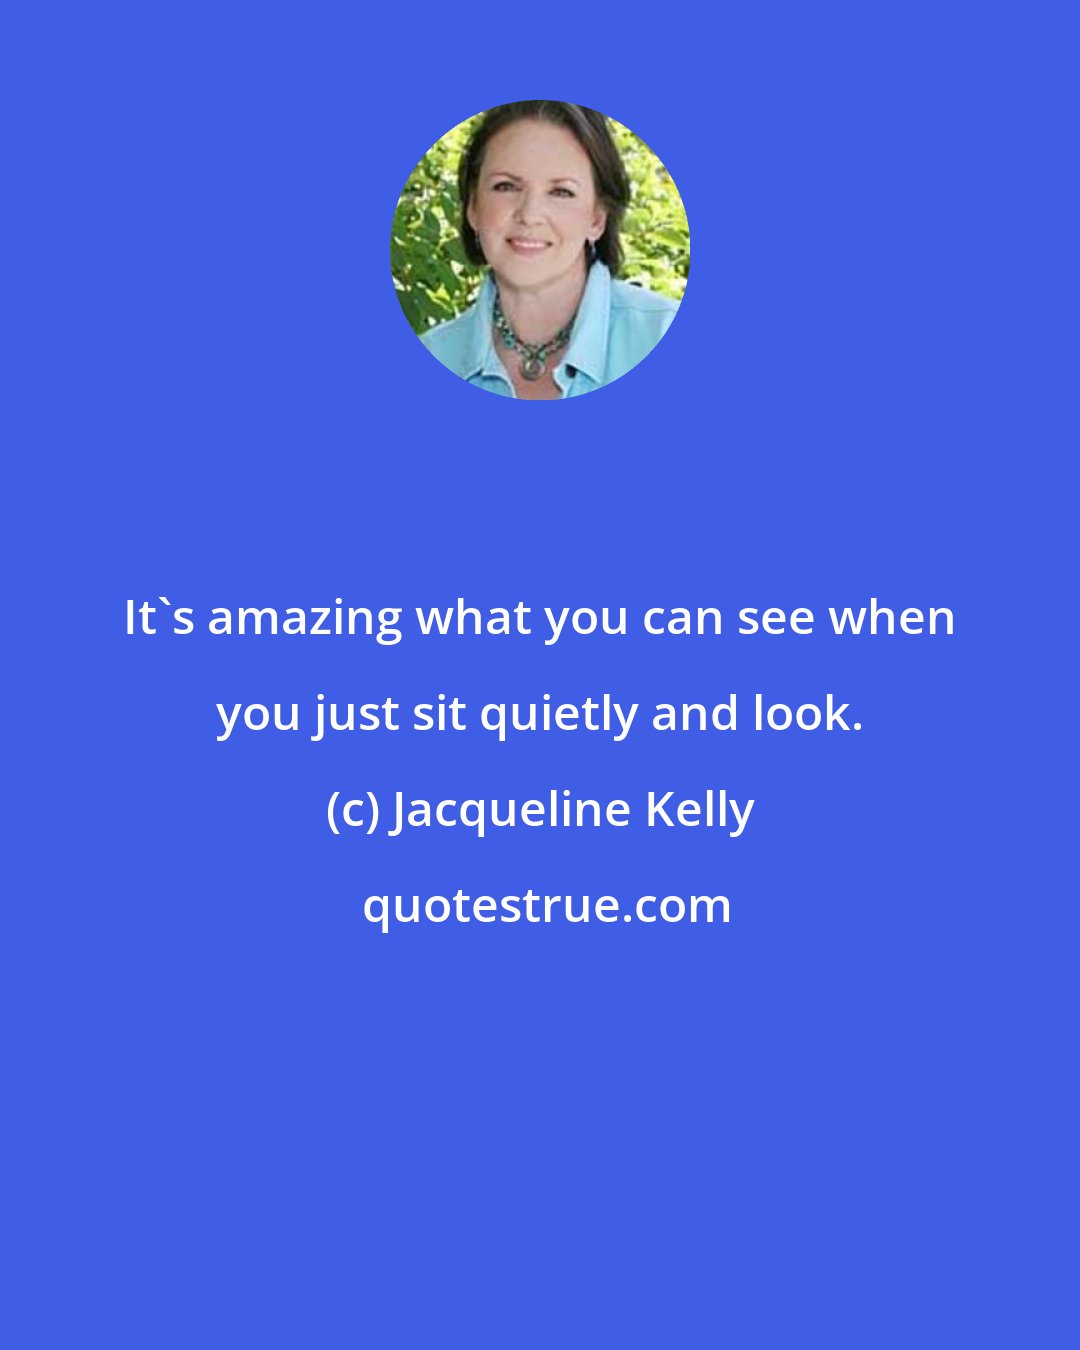 Jacqueline Kelly: It's amazing what you can see when you just sit quietly and look.